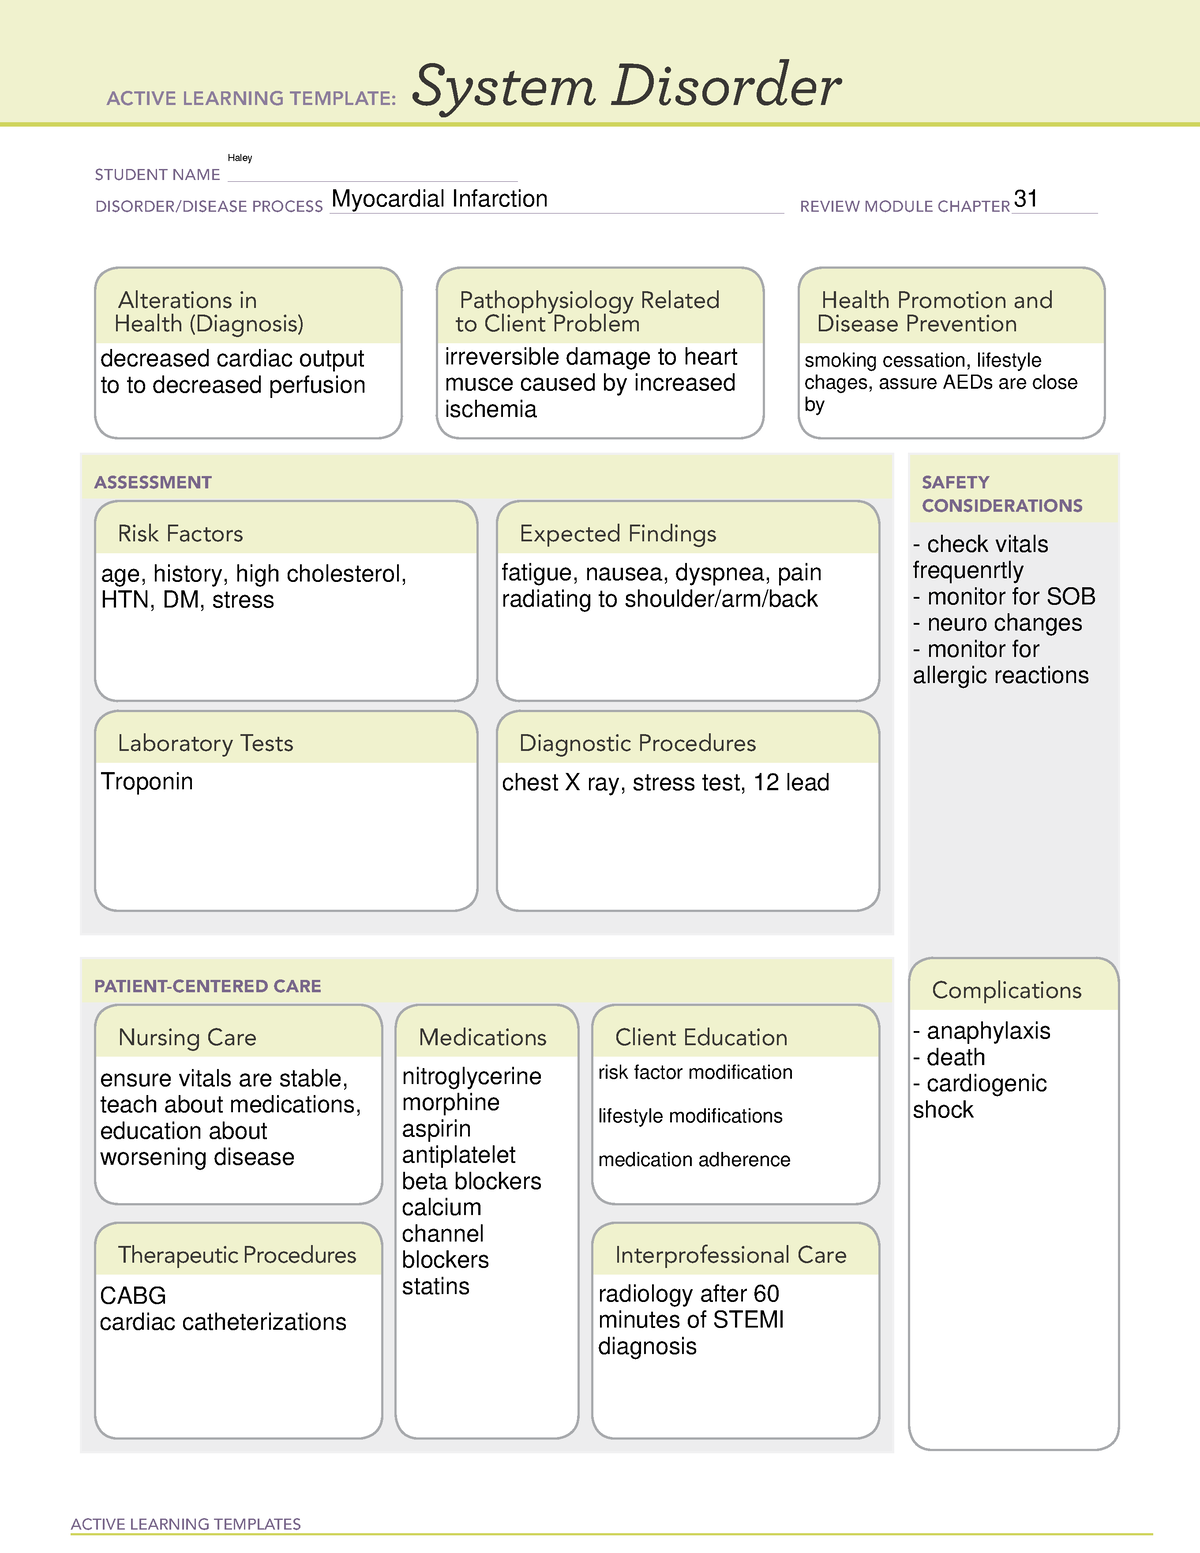 System disorder Myocardial infarction - ACTIVE LEARNING TEMPLATES ...